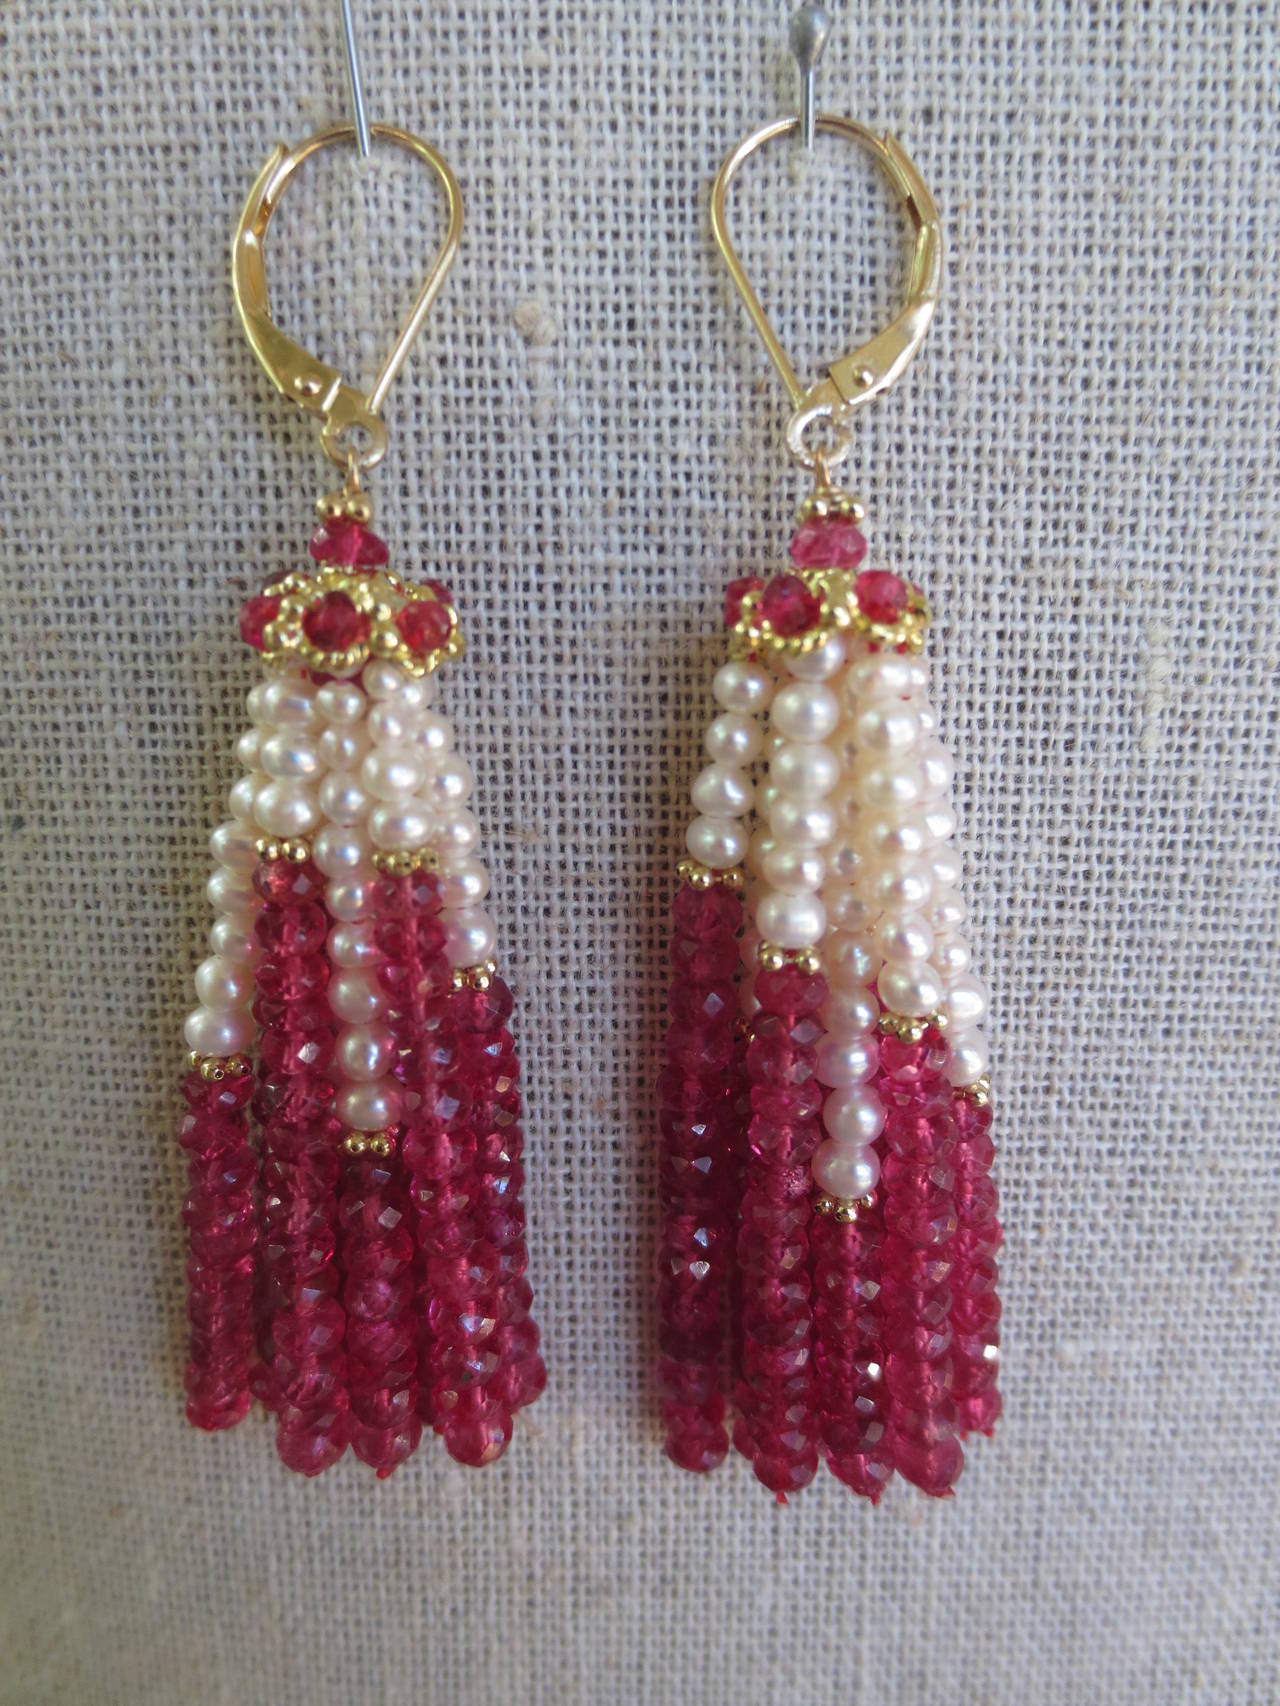 These elegant are the perfect gift.
Rich faceted ruby beads hang in gorgeous tassels along with cultured pearls, and accented with gold findings, creating a lightness to the lush tassel. The strands hang from a 14 k yellow gold cup detailed with